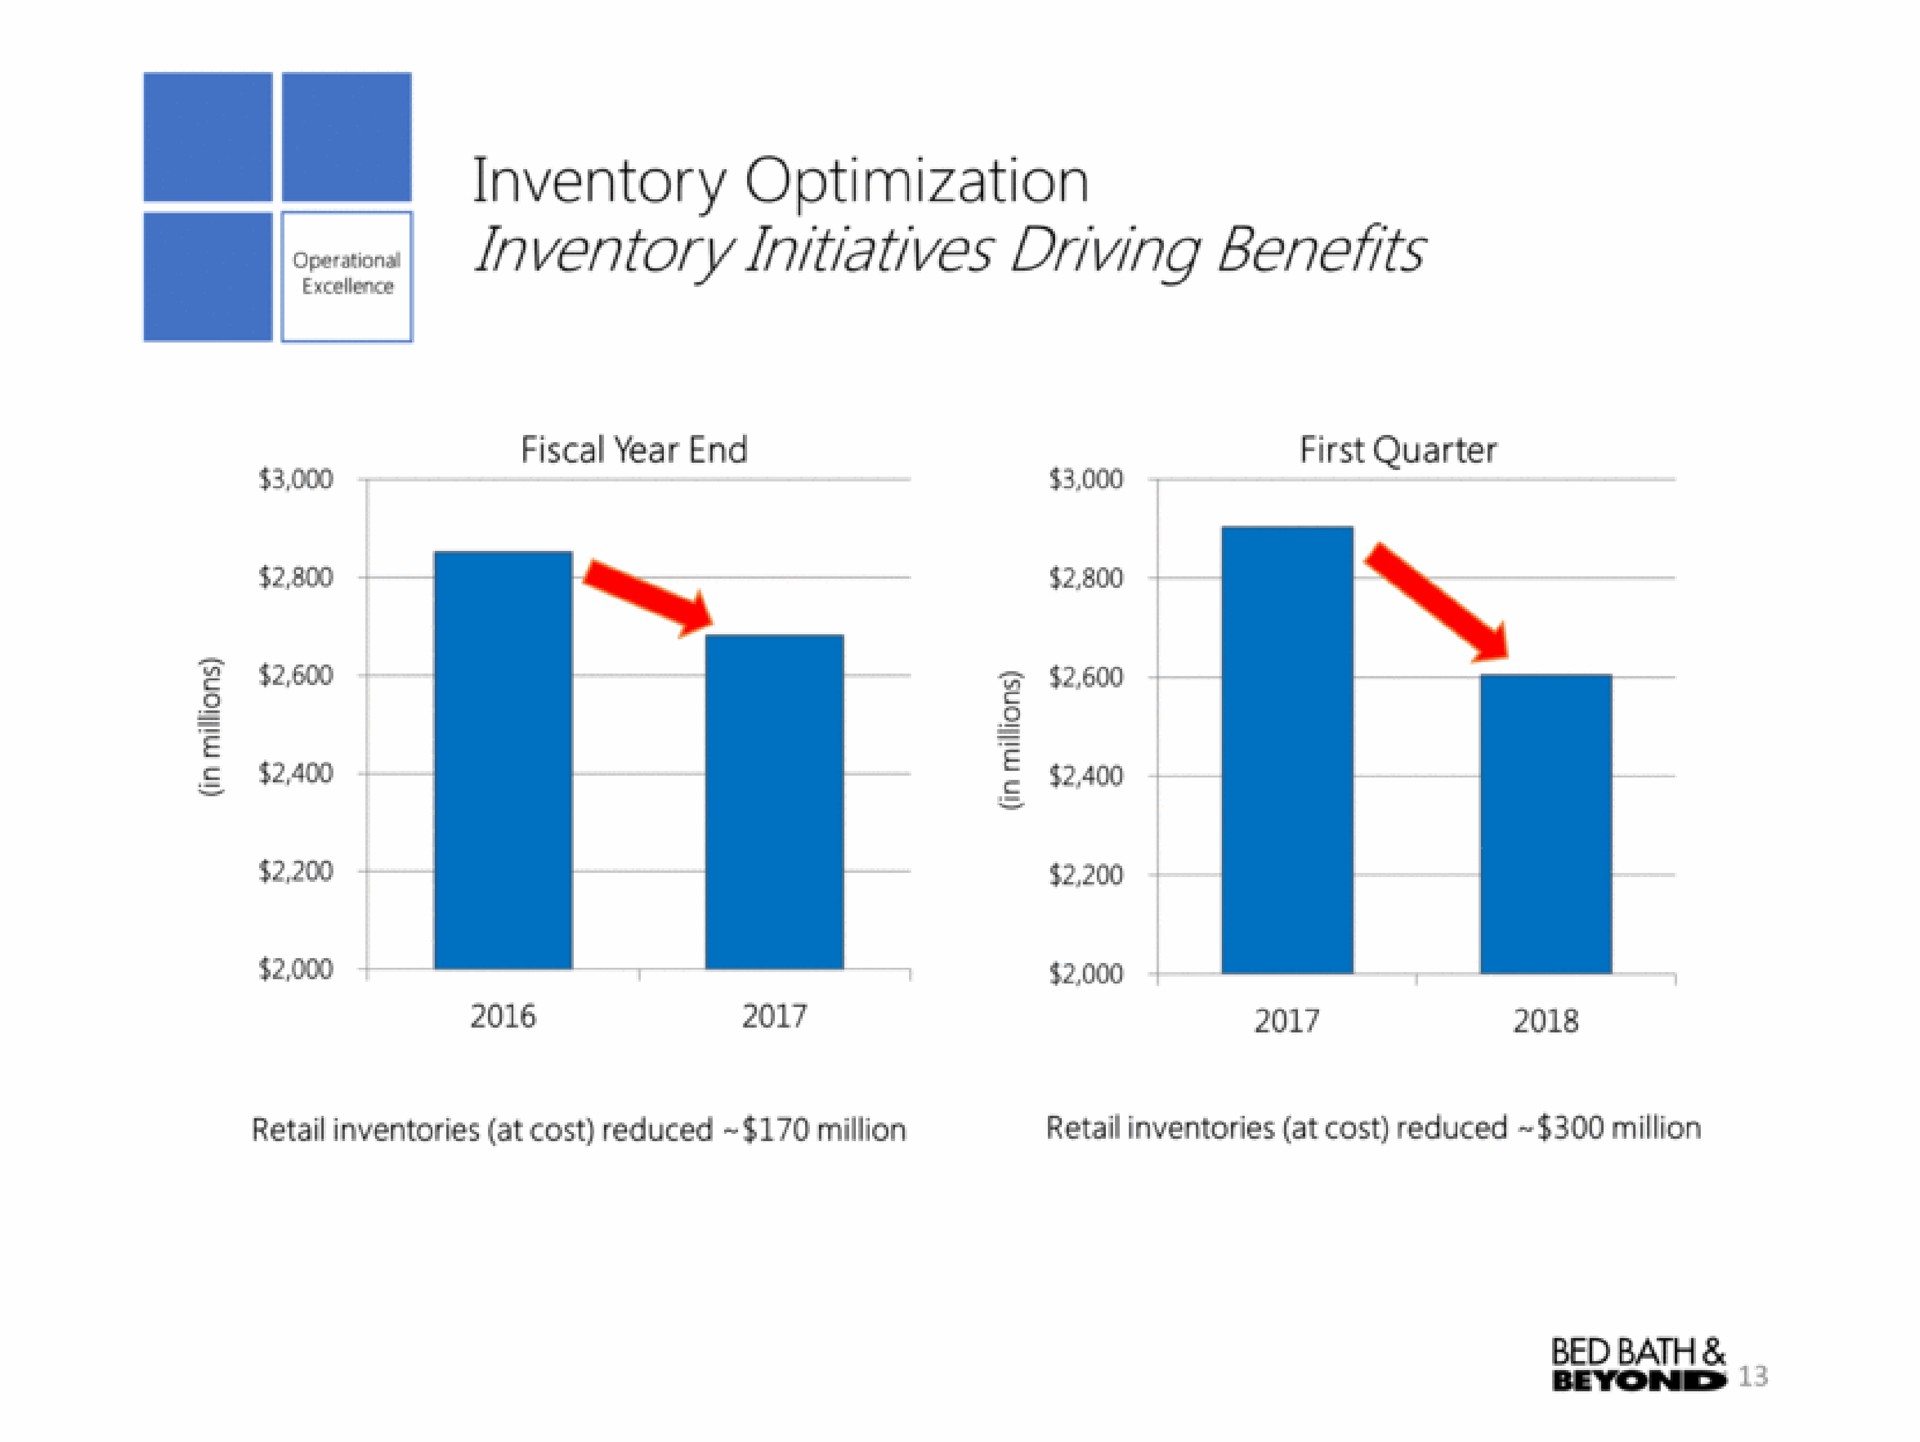 inventory initiatives driving benefits a | Bed Bath & Beyond